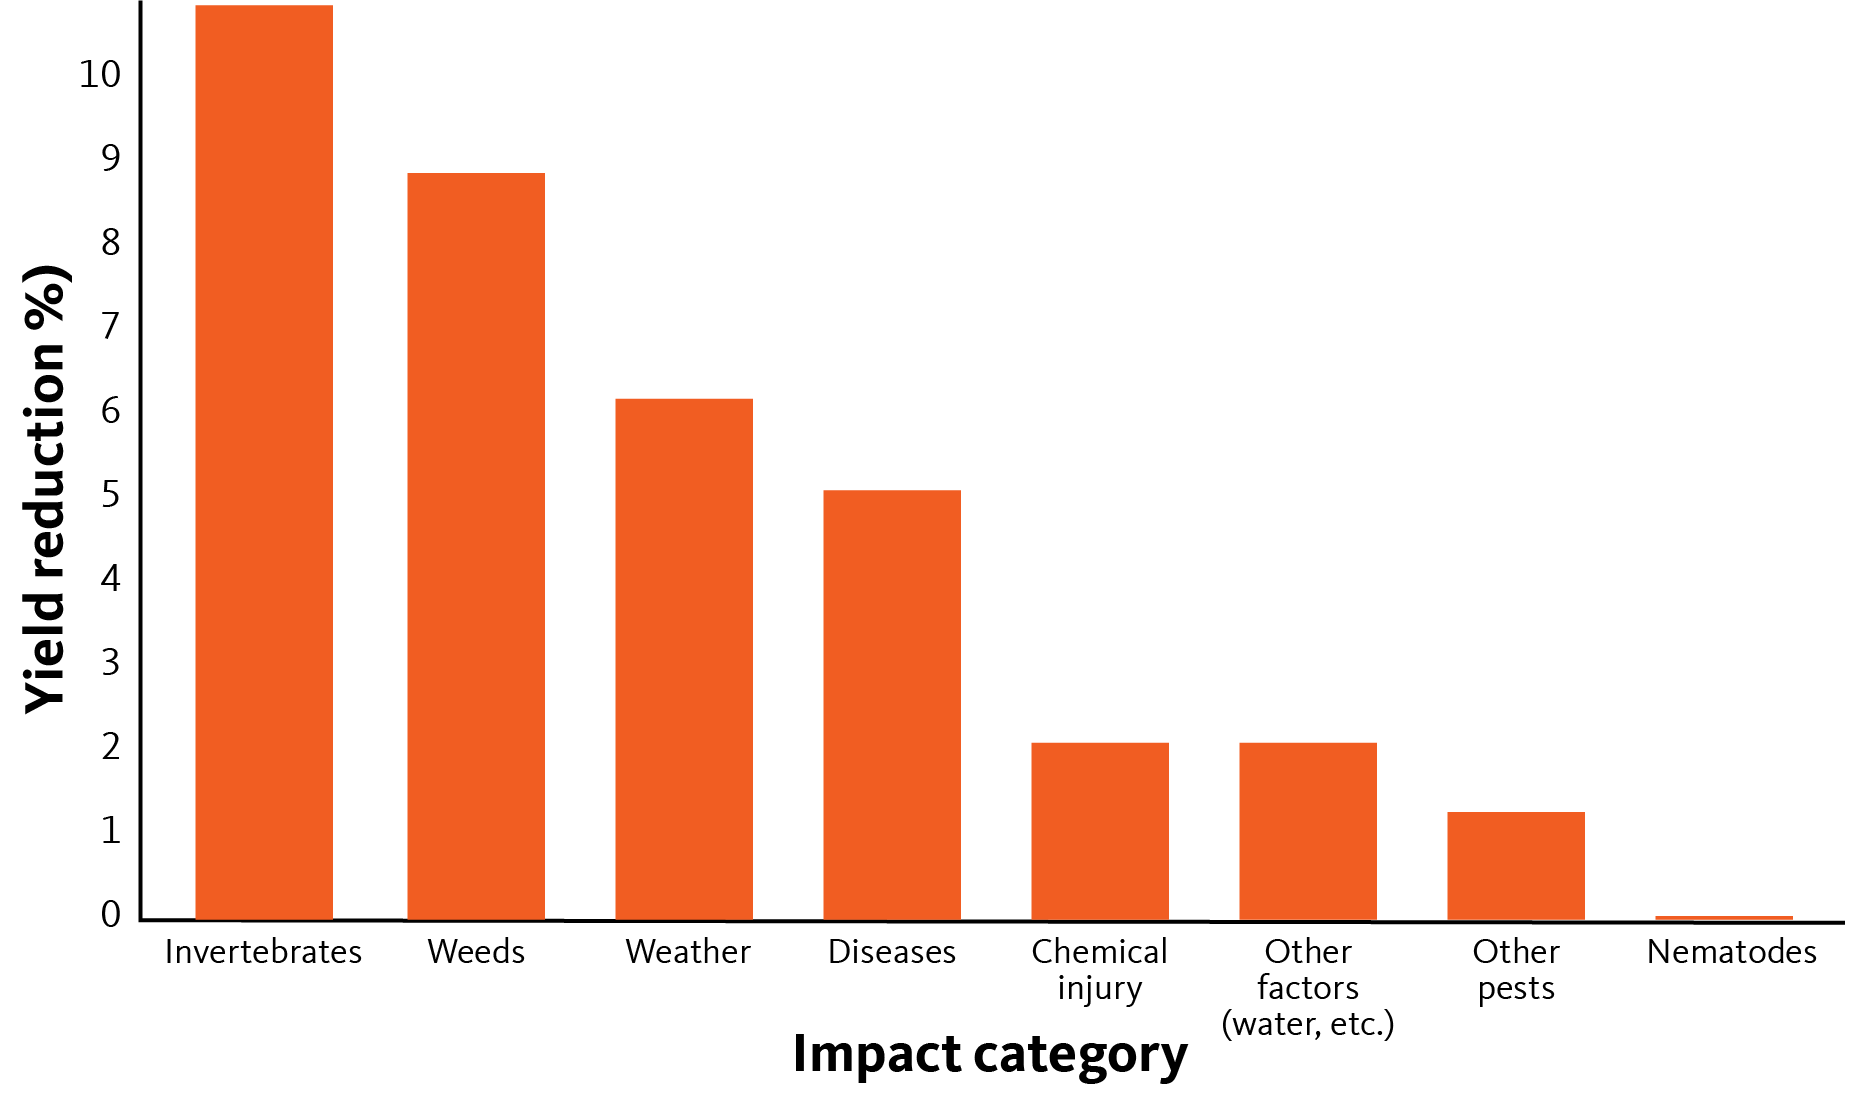 bar chart showing yield reduction for different categories. Invertebrates and weeds lead.